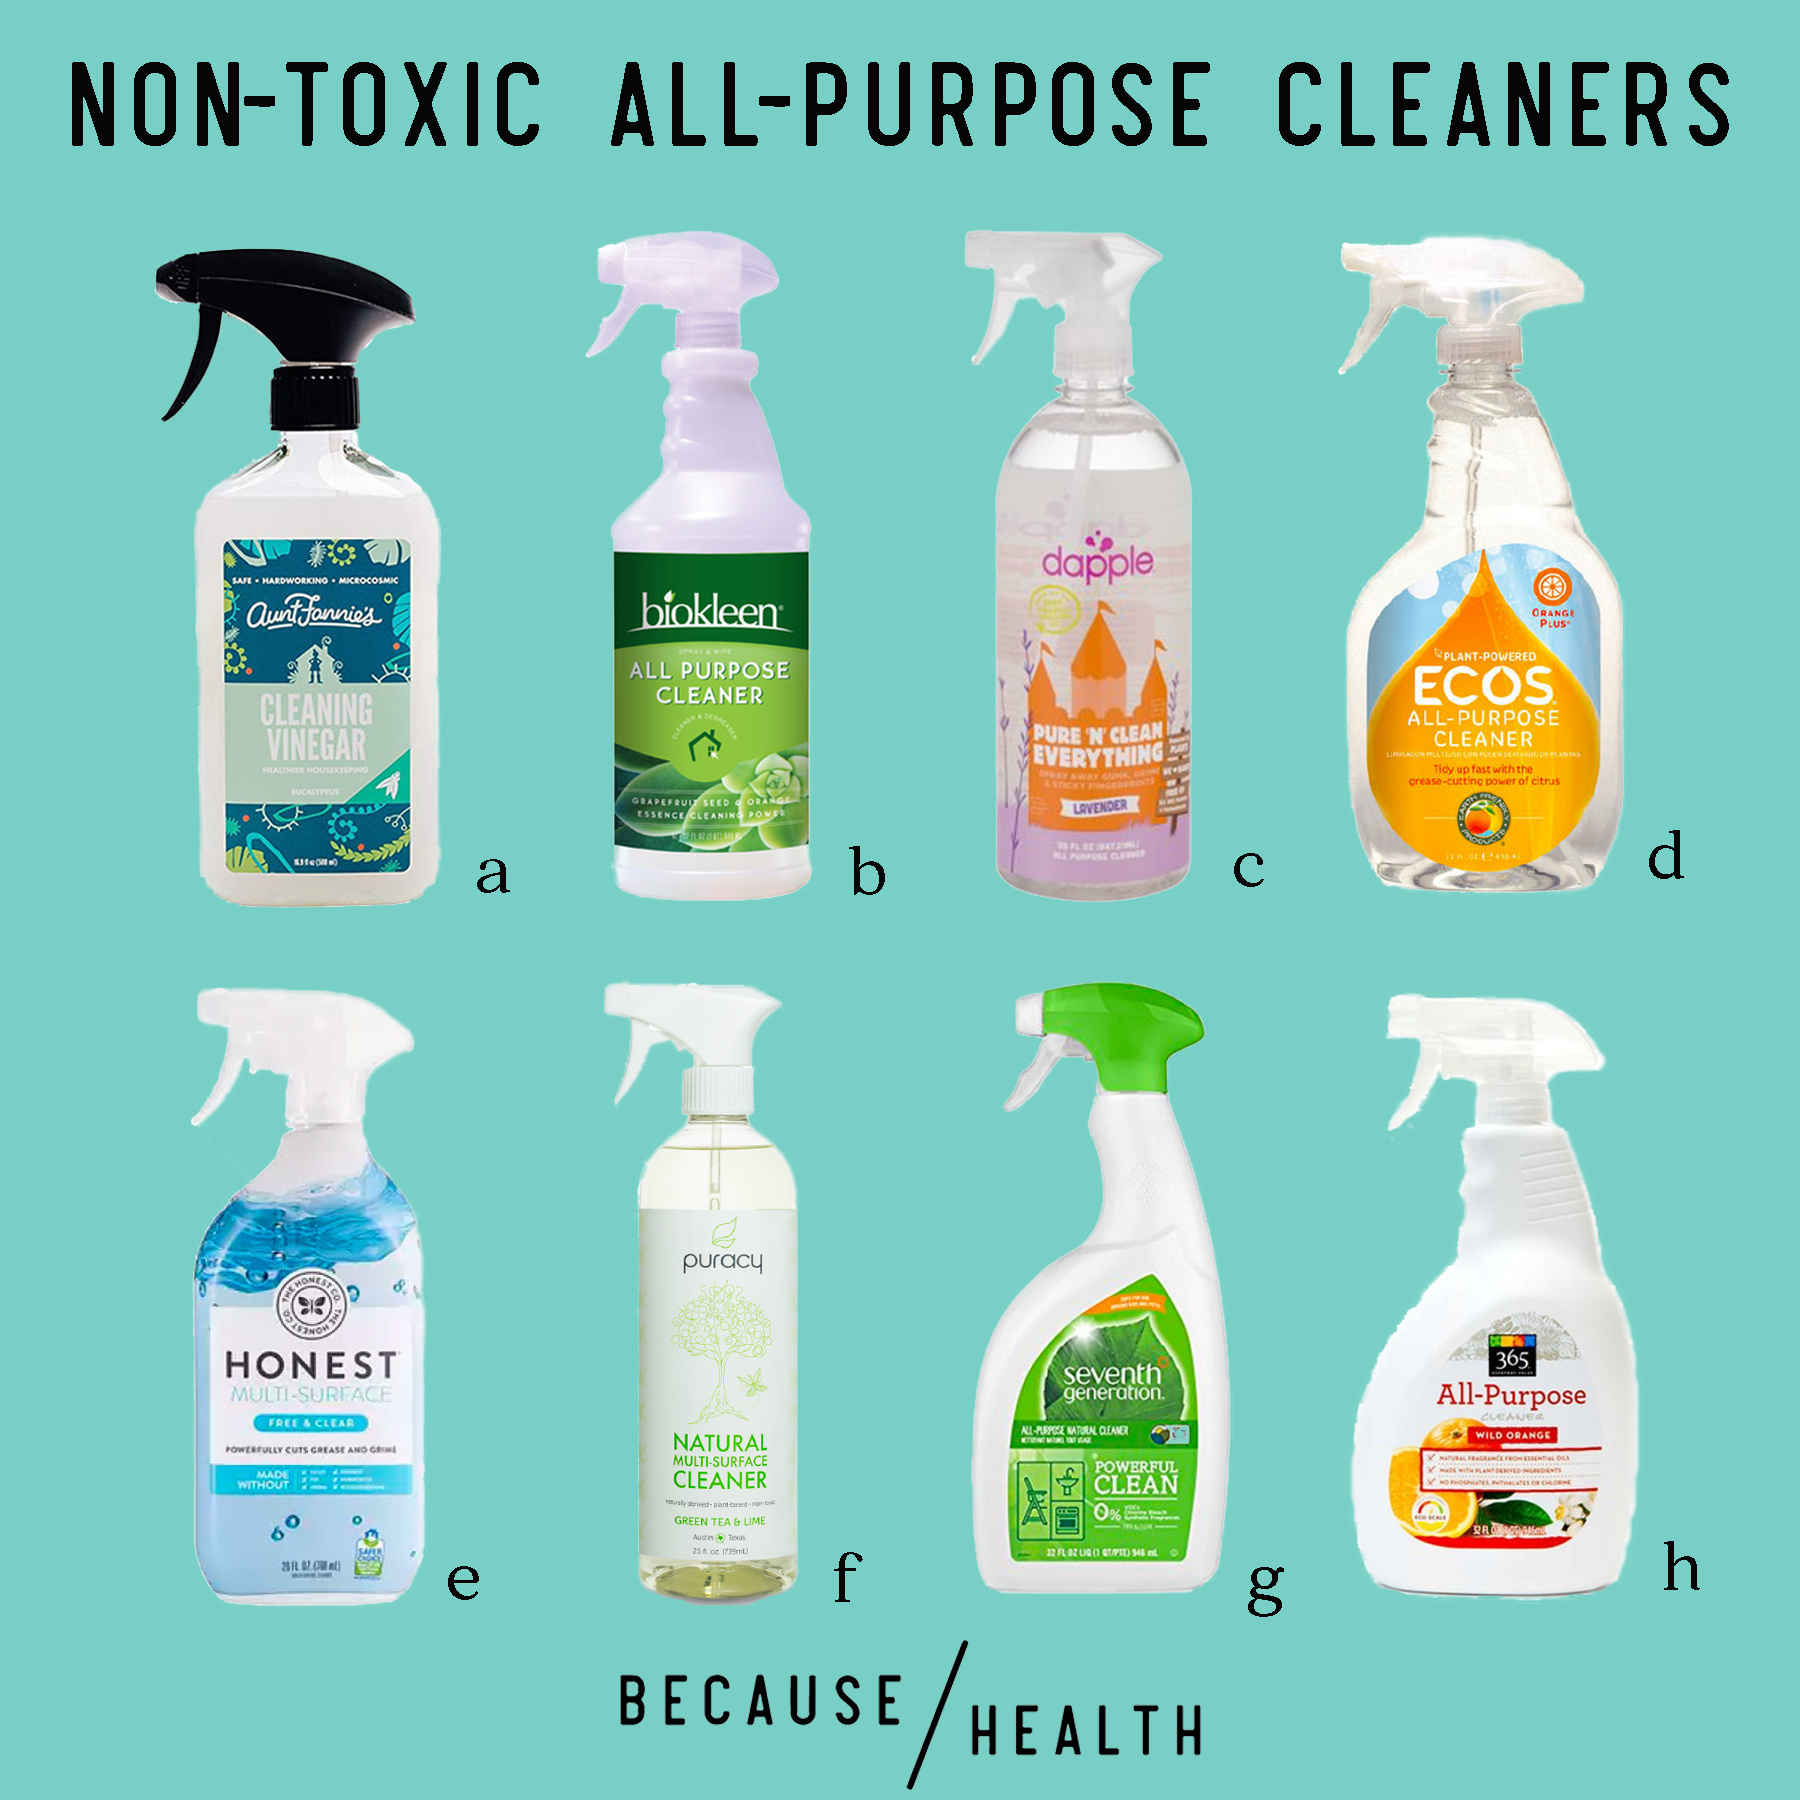 Non-toxic household products